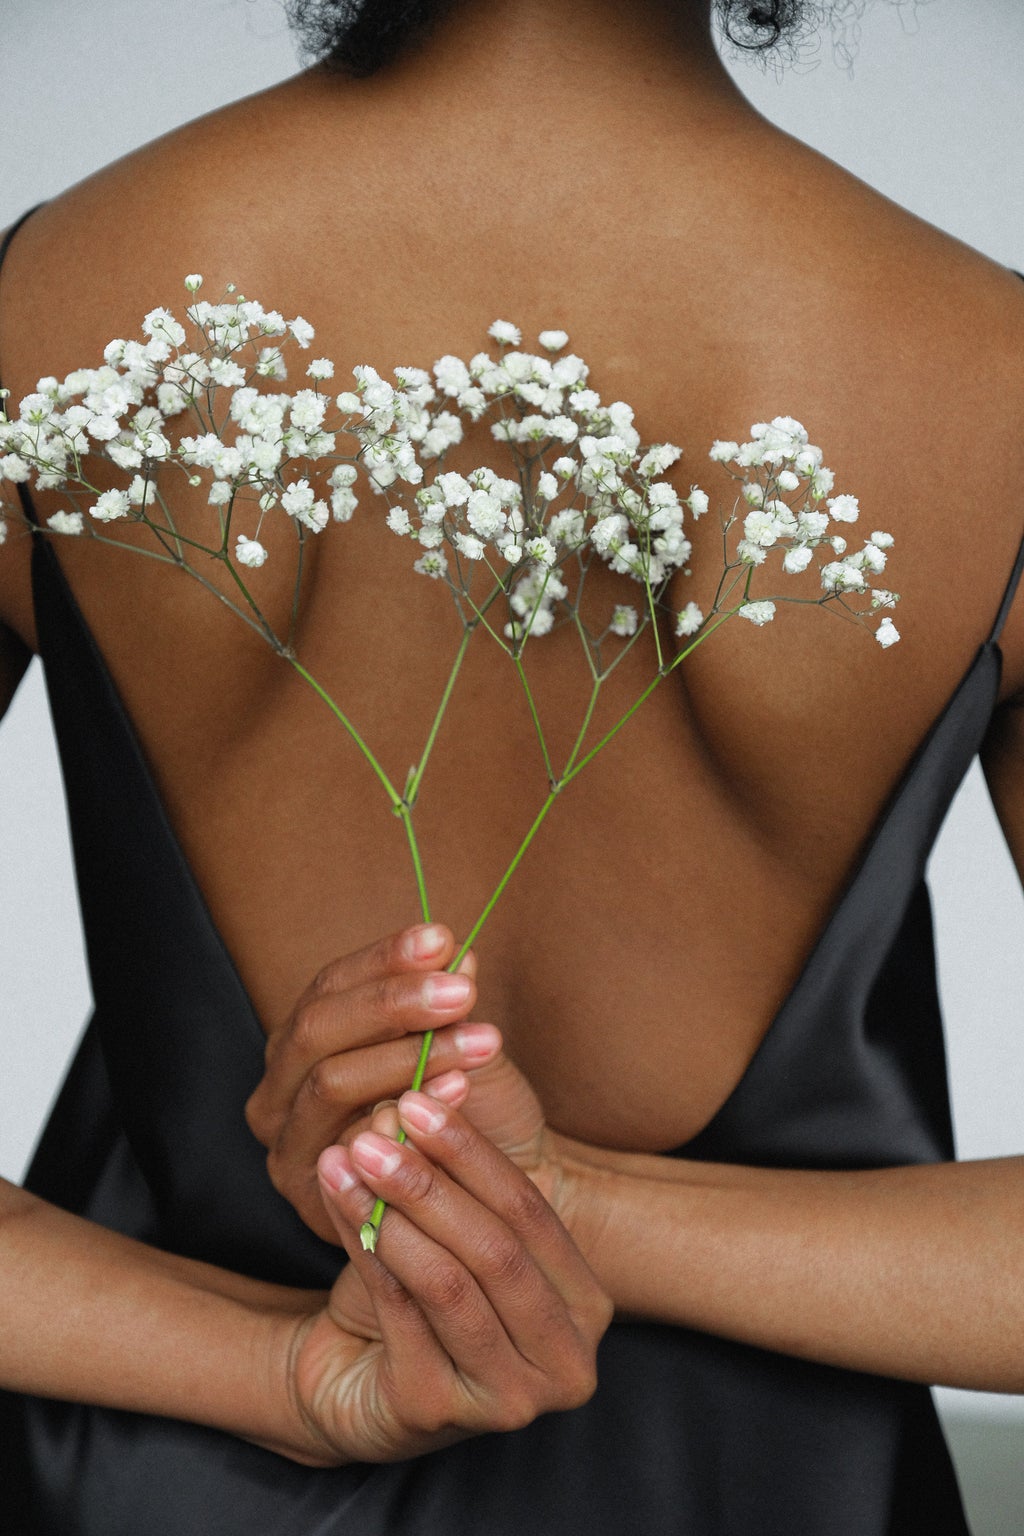 Black woman holding flowers behind back